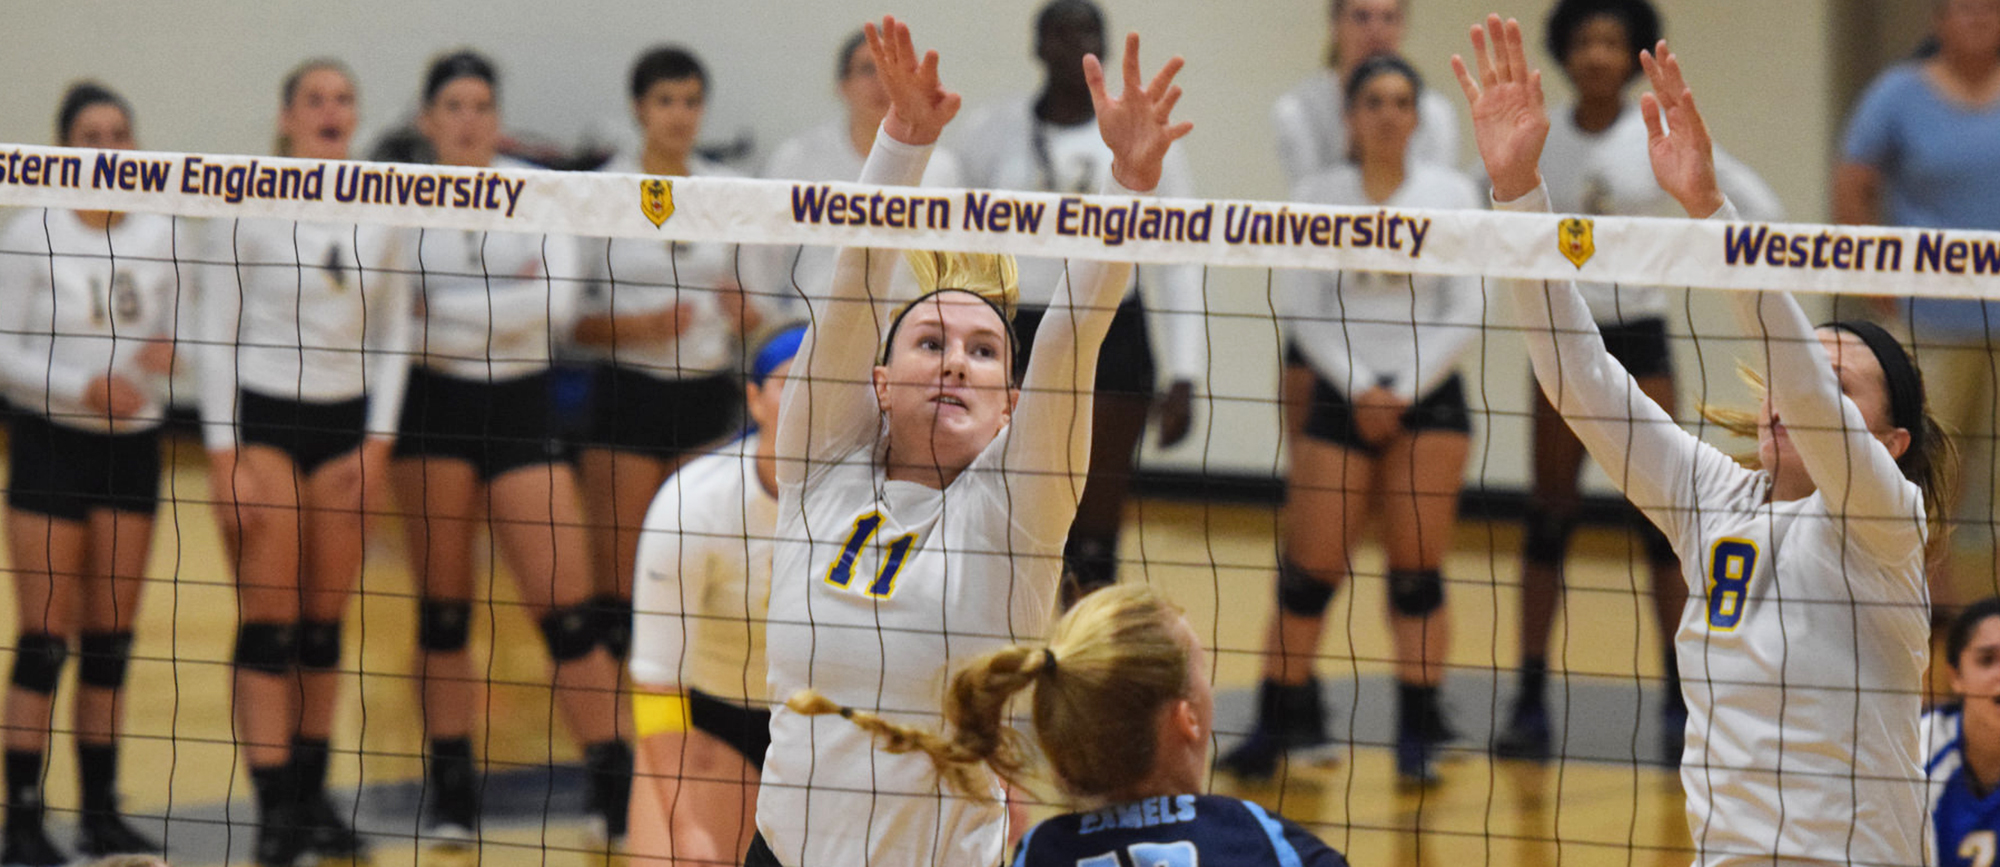 Junior Cassie Holmes recorded six kills and three blocks in Western New England's 3-0 loss to Keene State on Thursday. (Photo by Rachael Margossian)